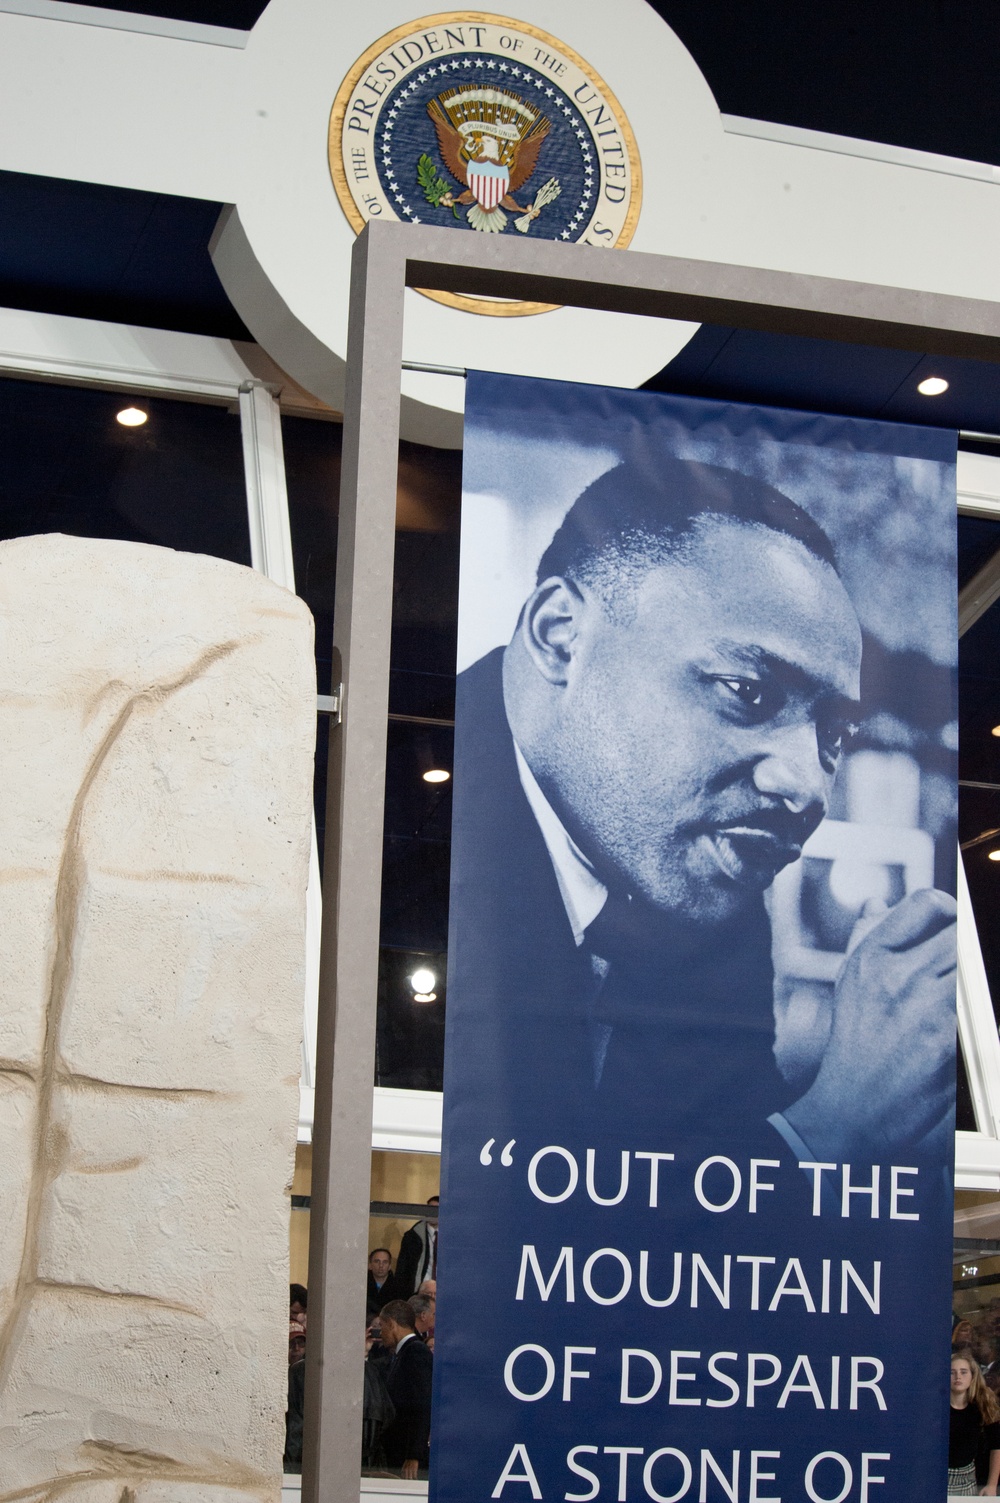 The Martin Luther King Jr. float at the 57th Presidential Inauguration